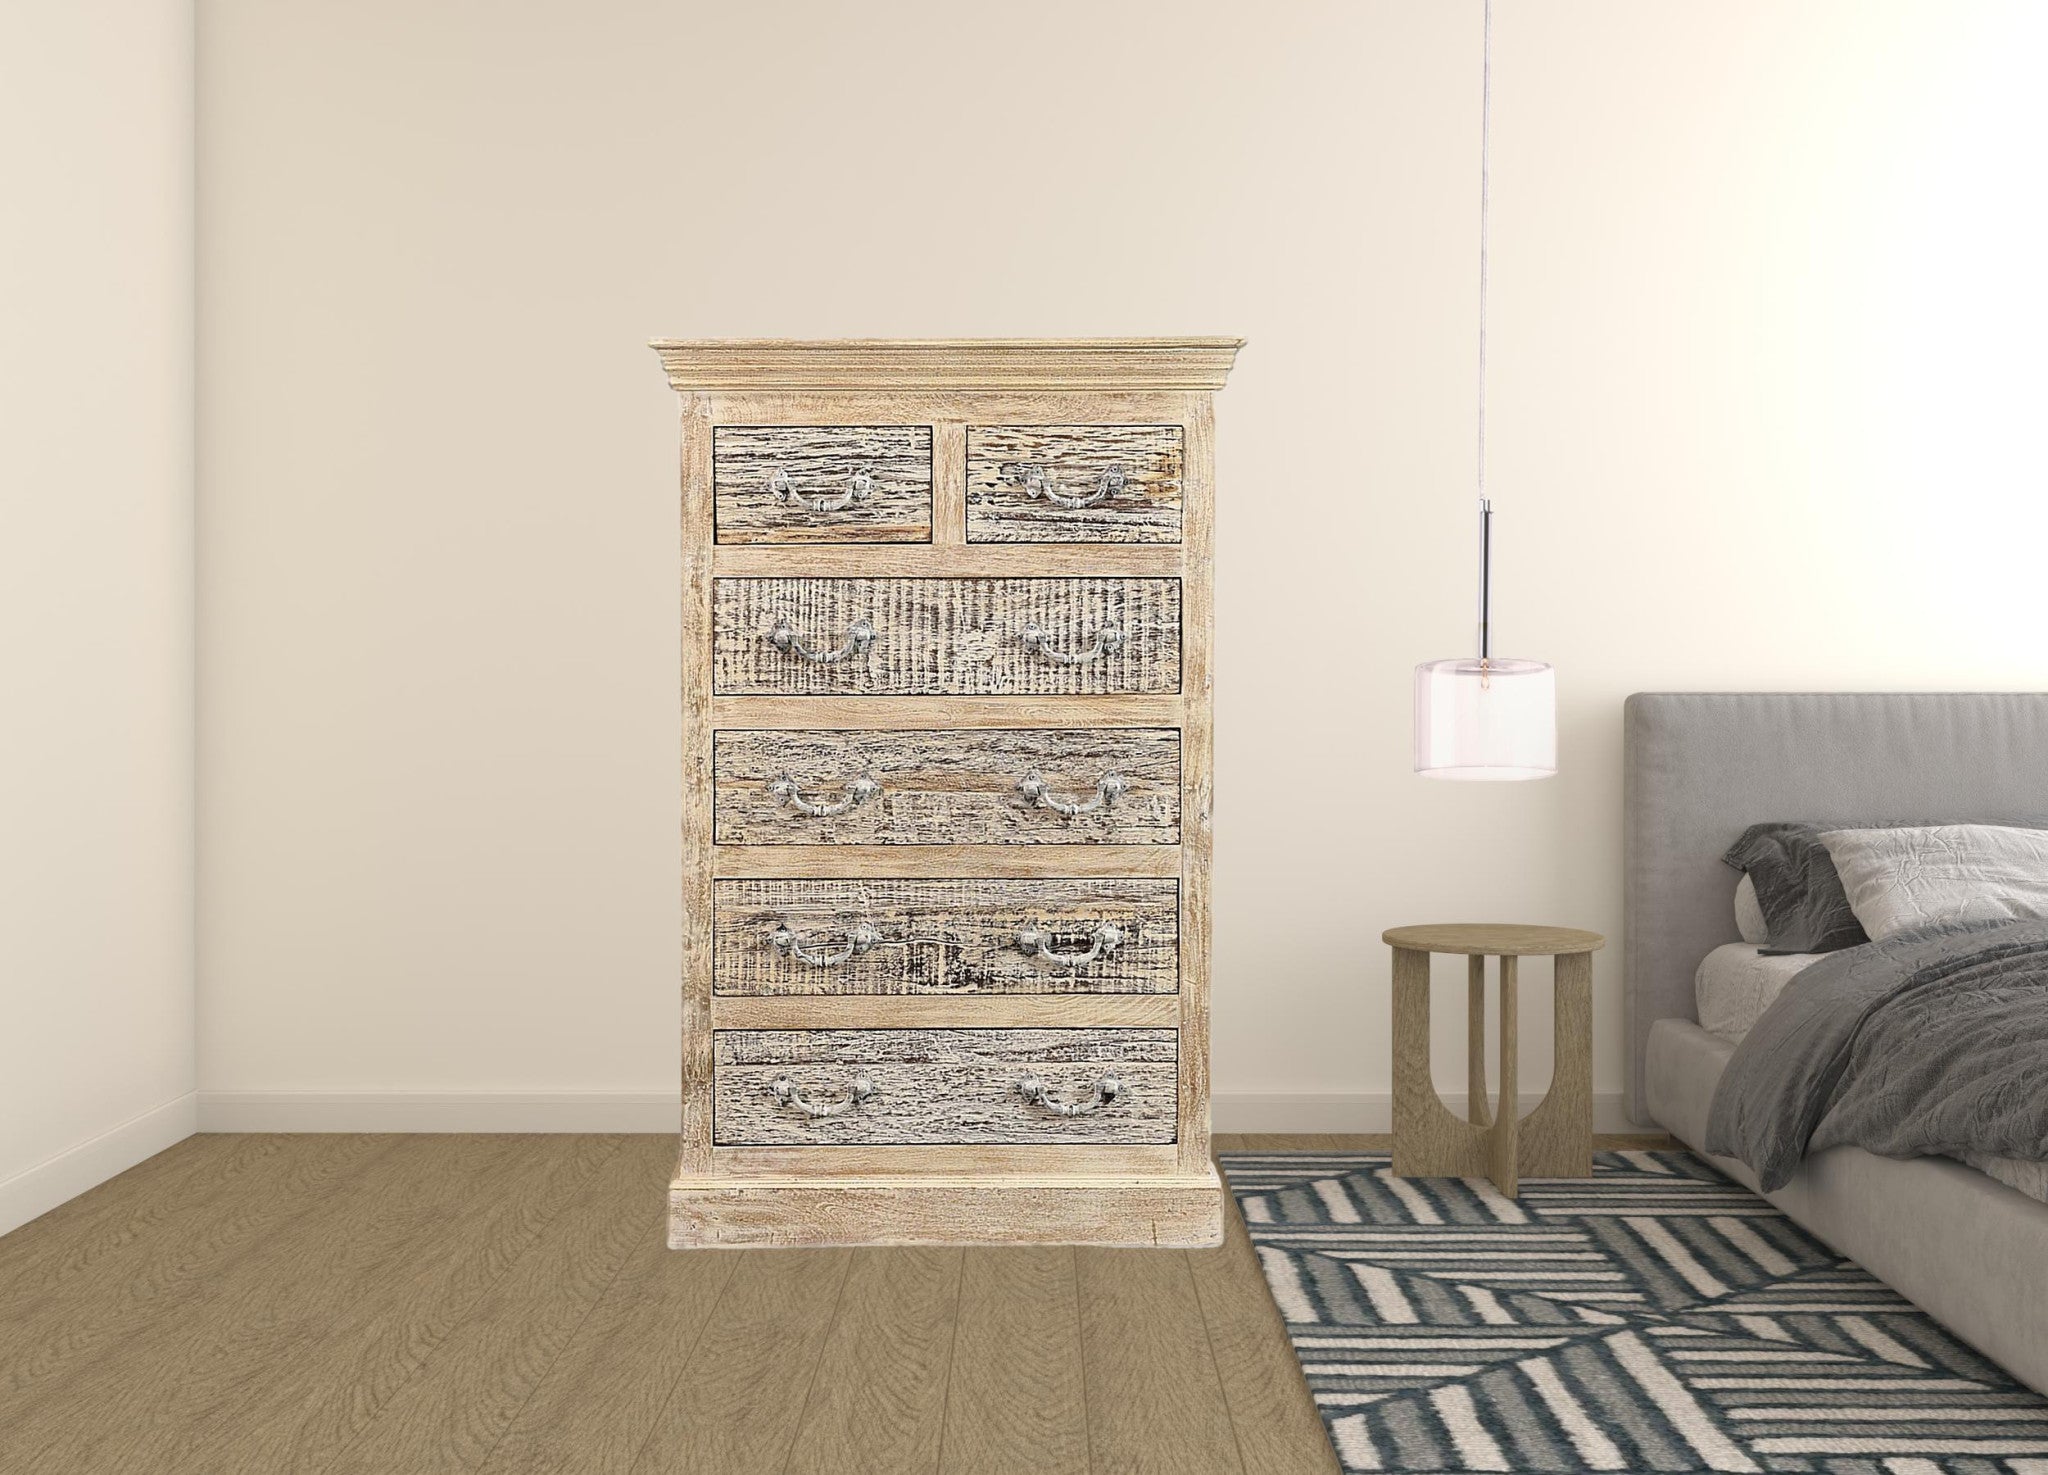 35" White Solid Wood Six Drawer Chest